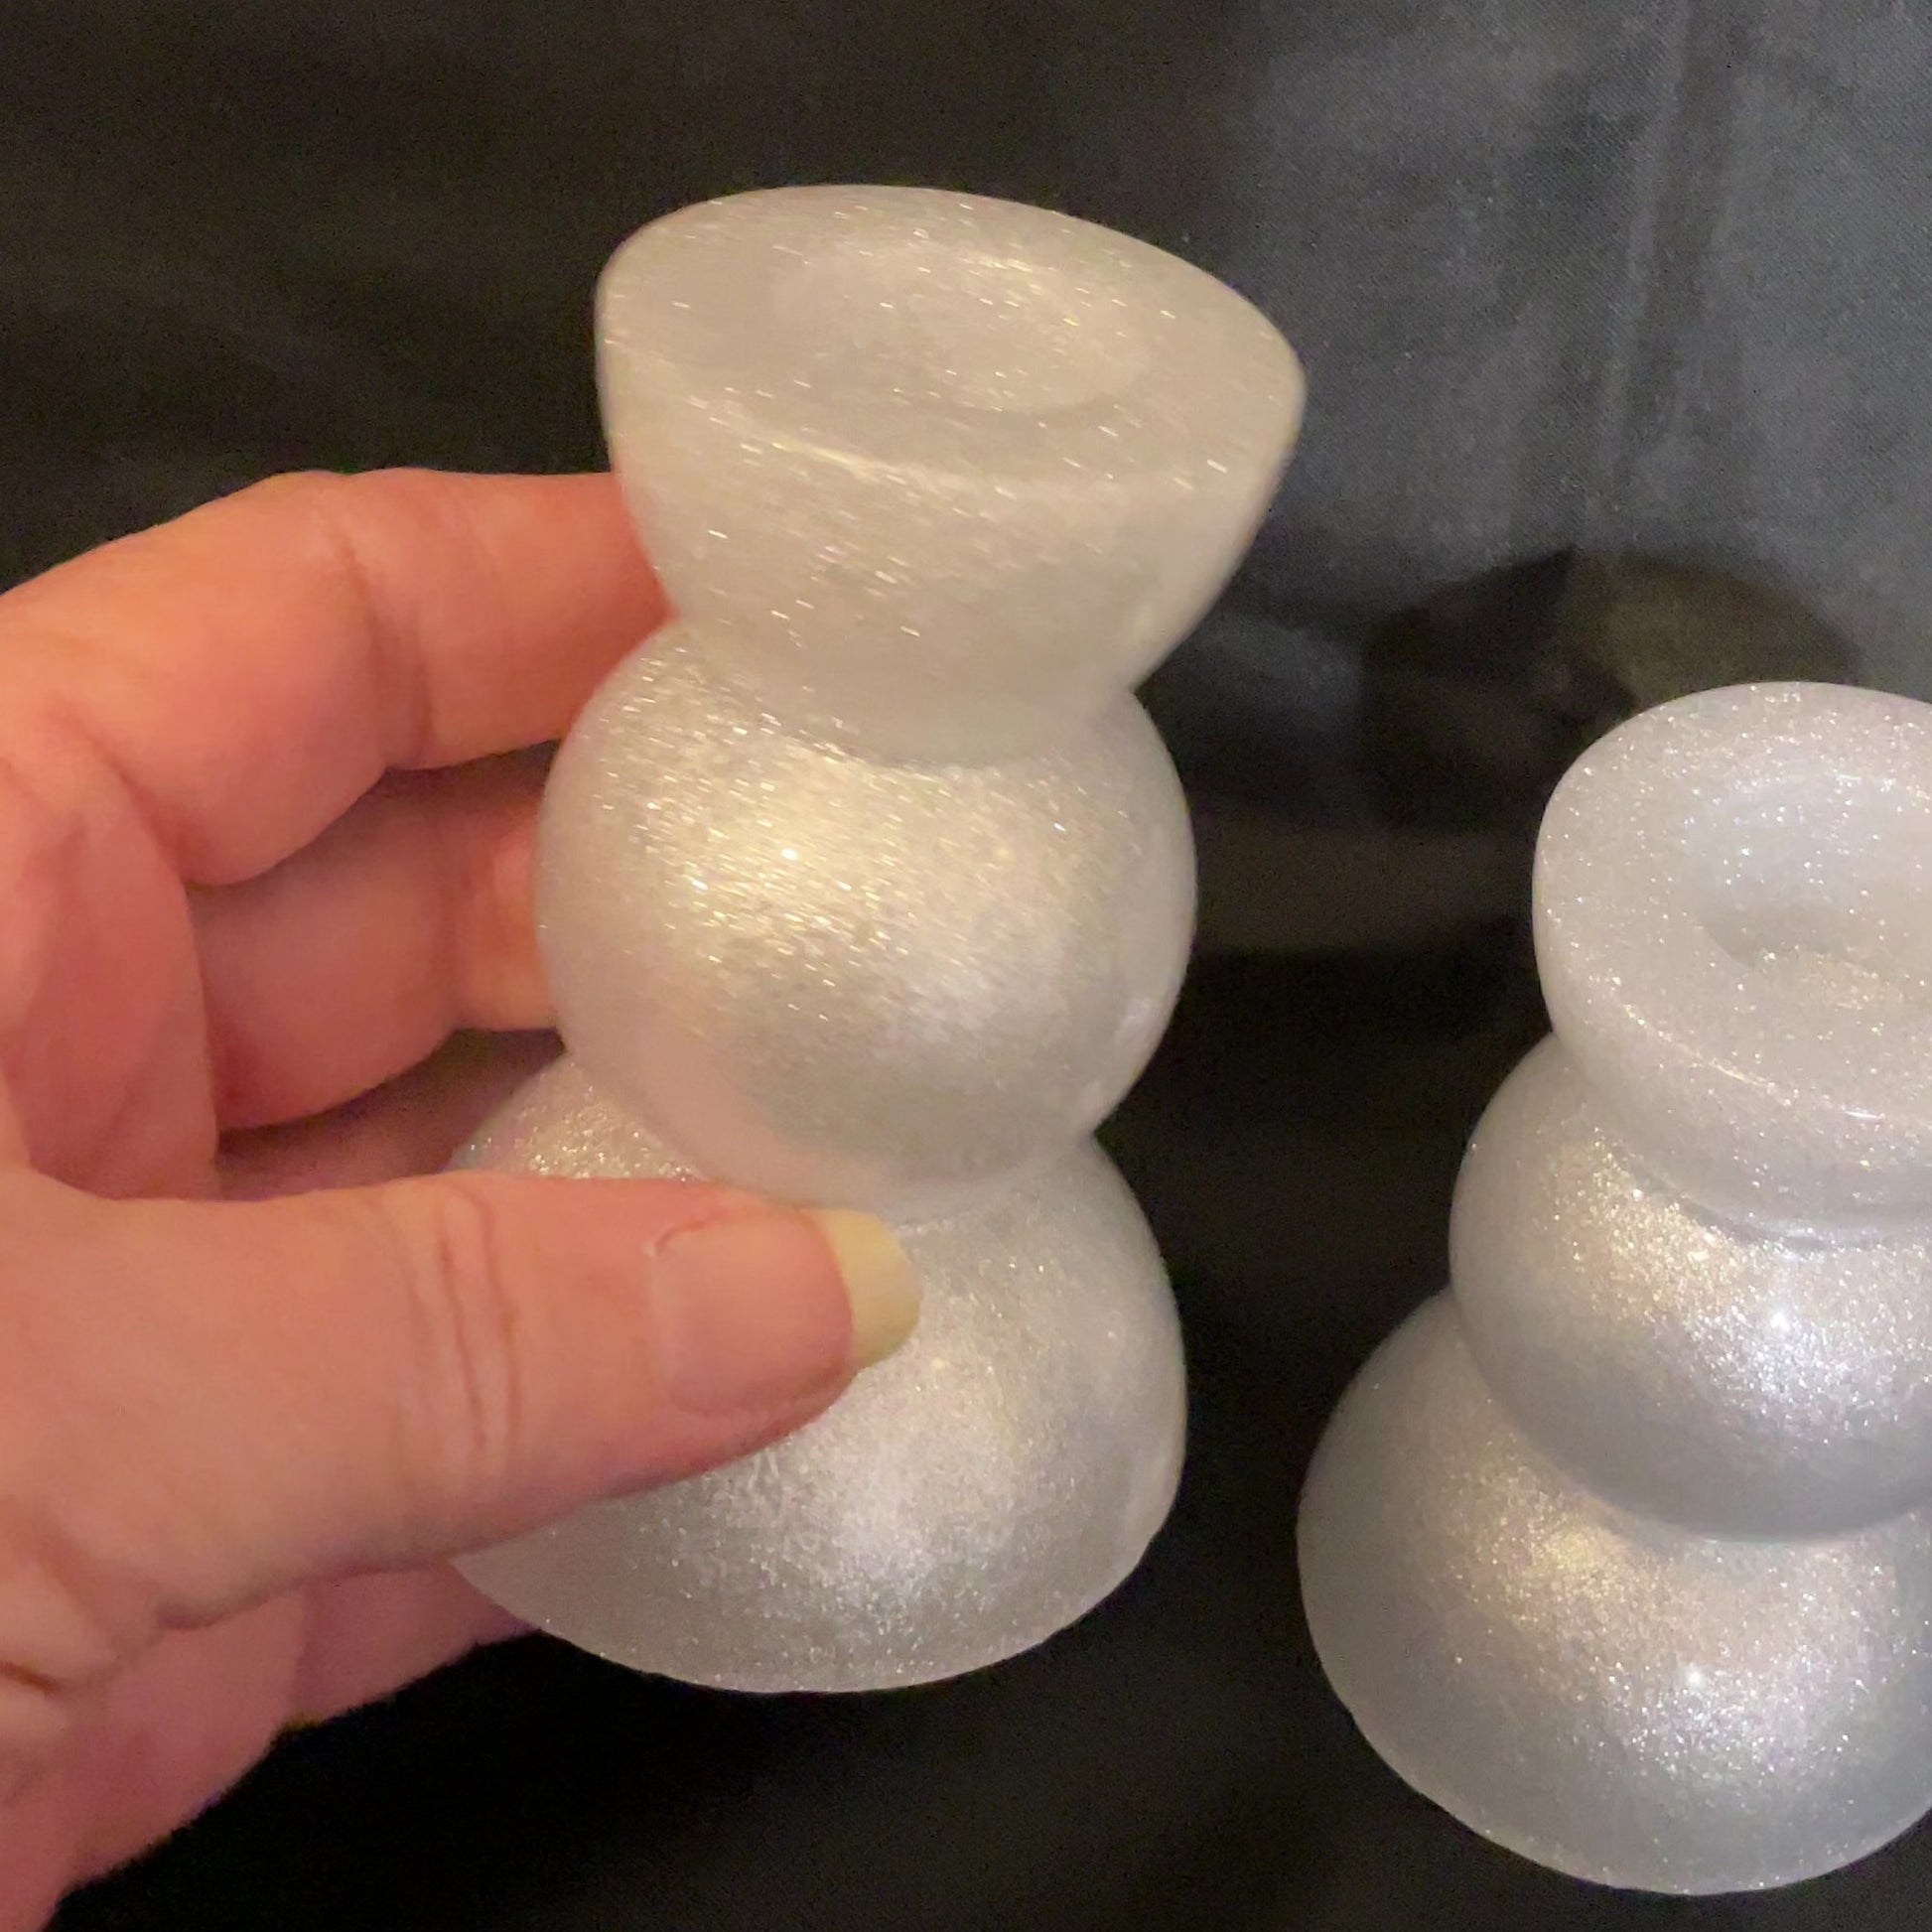 Set of Two Sparkly White Resin Handmade Rounded Geometric Candlestick Holders video showing how they sparkle in the light.